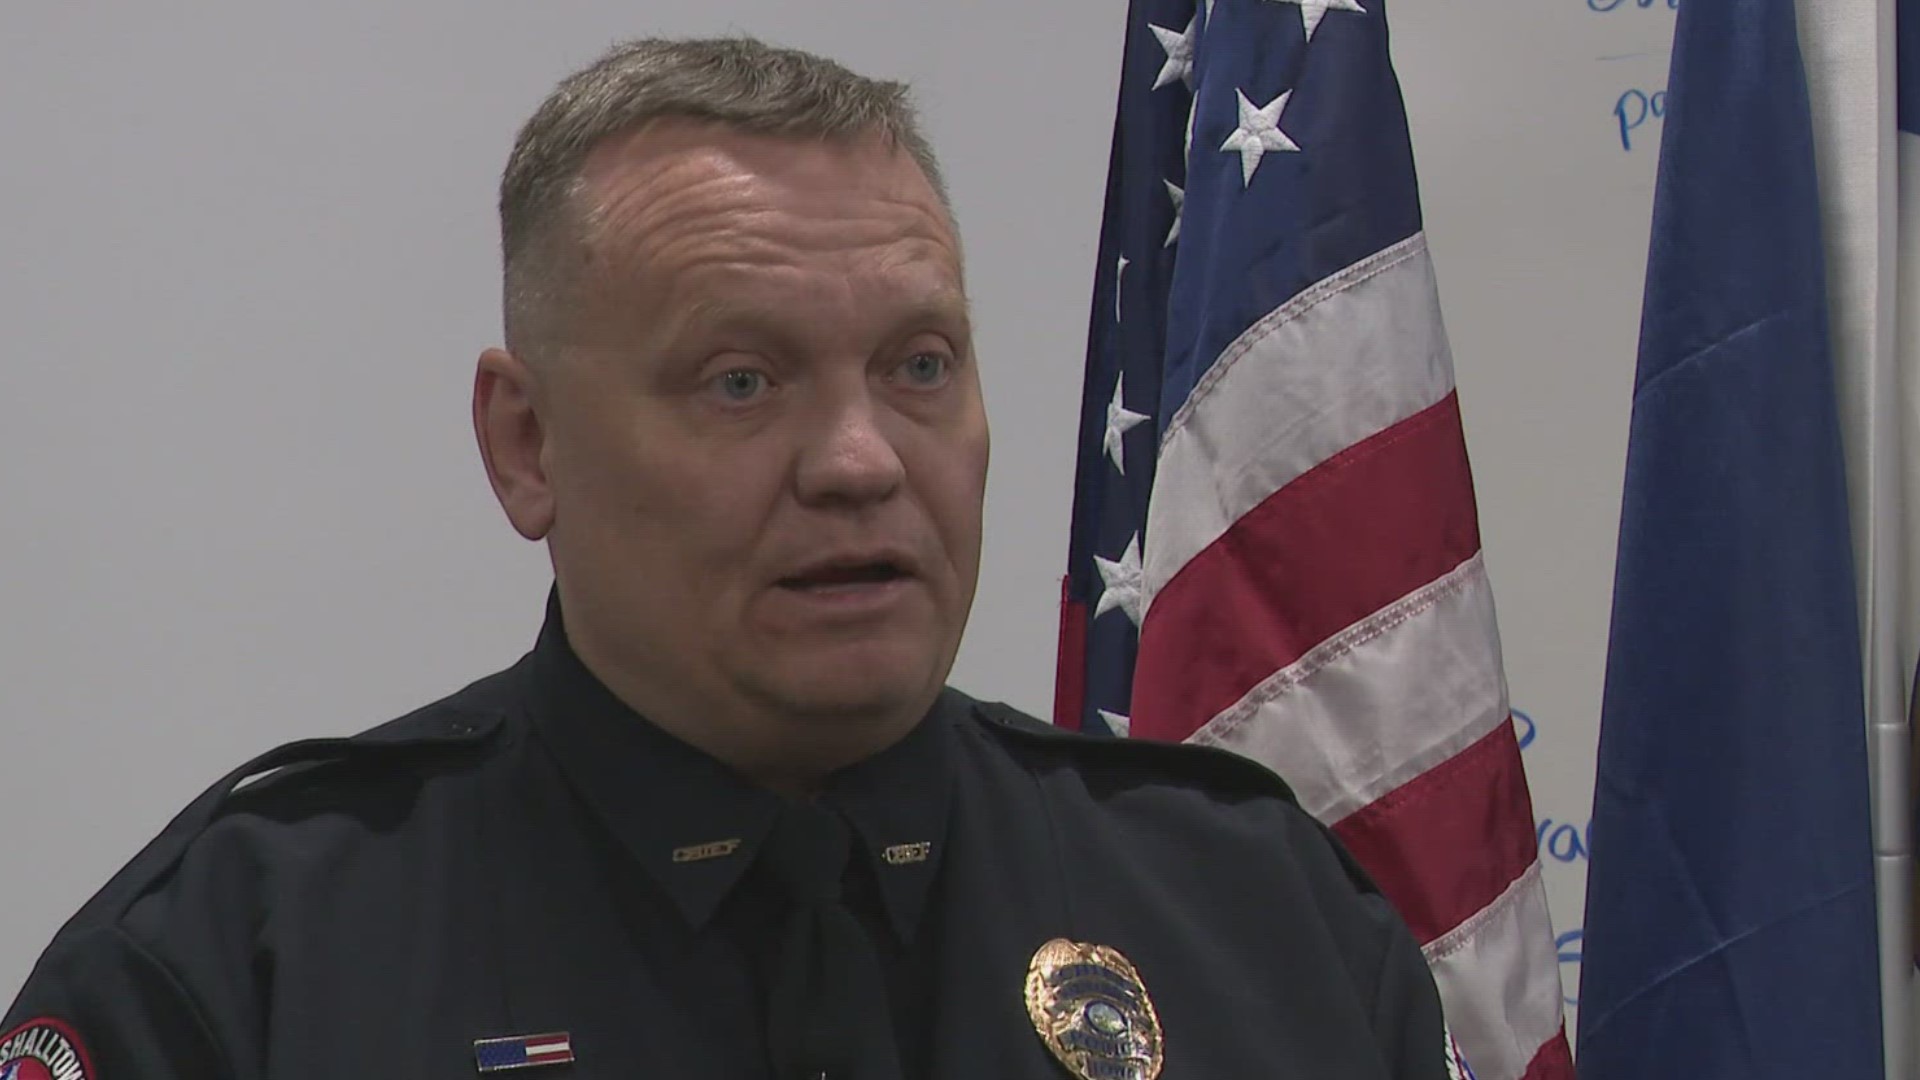 Marshalltown Police Chief Michael Tupper shares in Mayor Joel Greer's concerns while also worrying the law may deter people from contacting police.